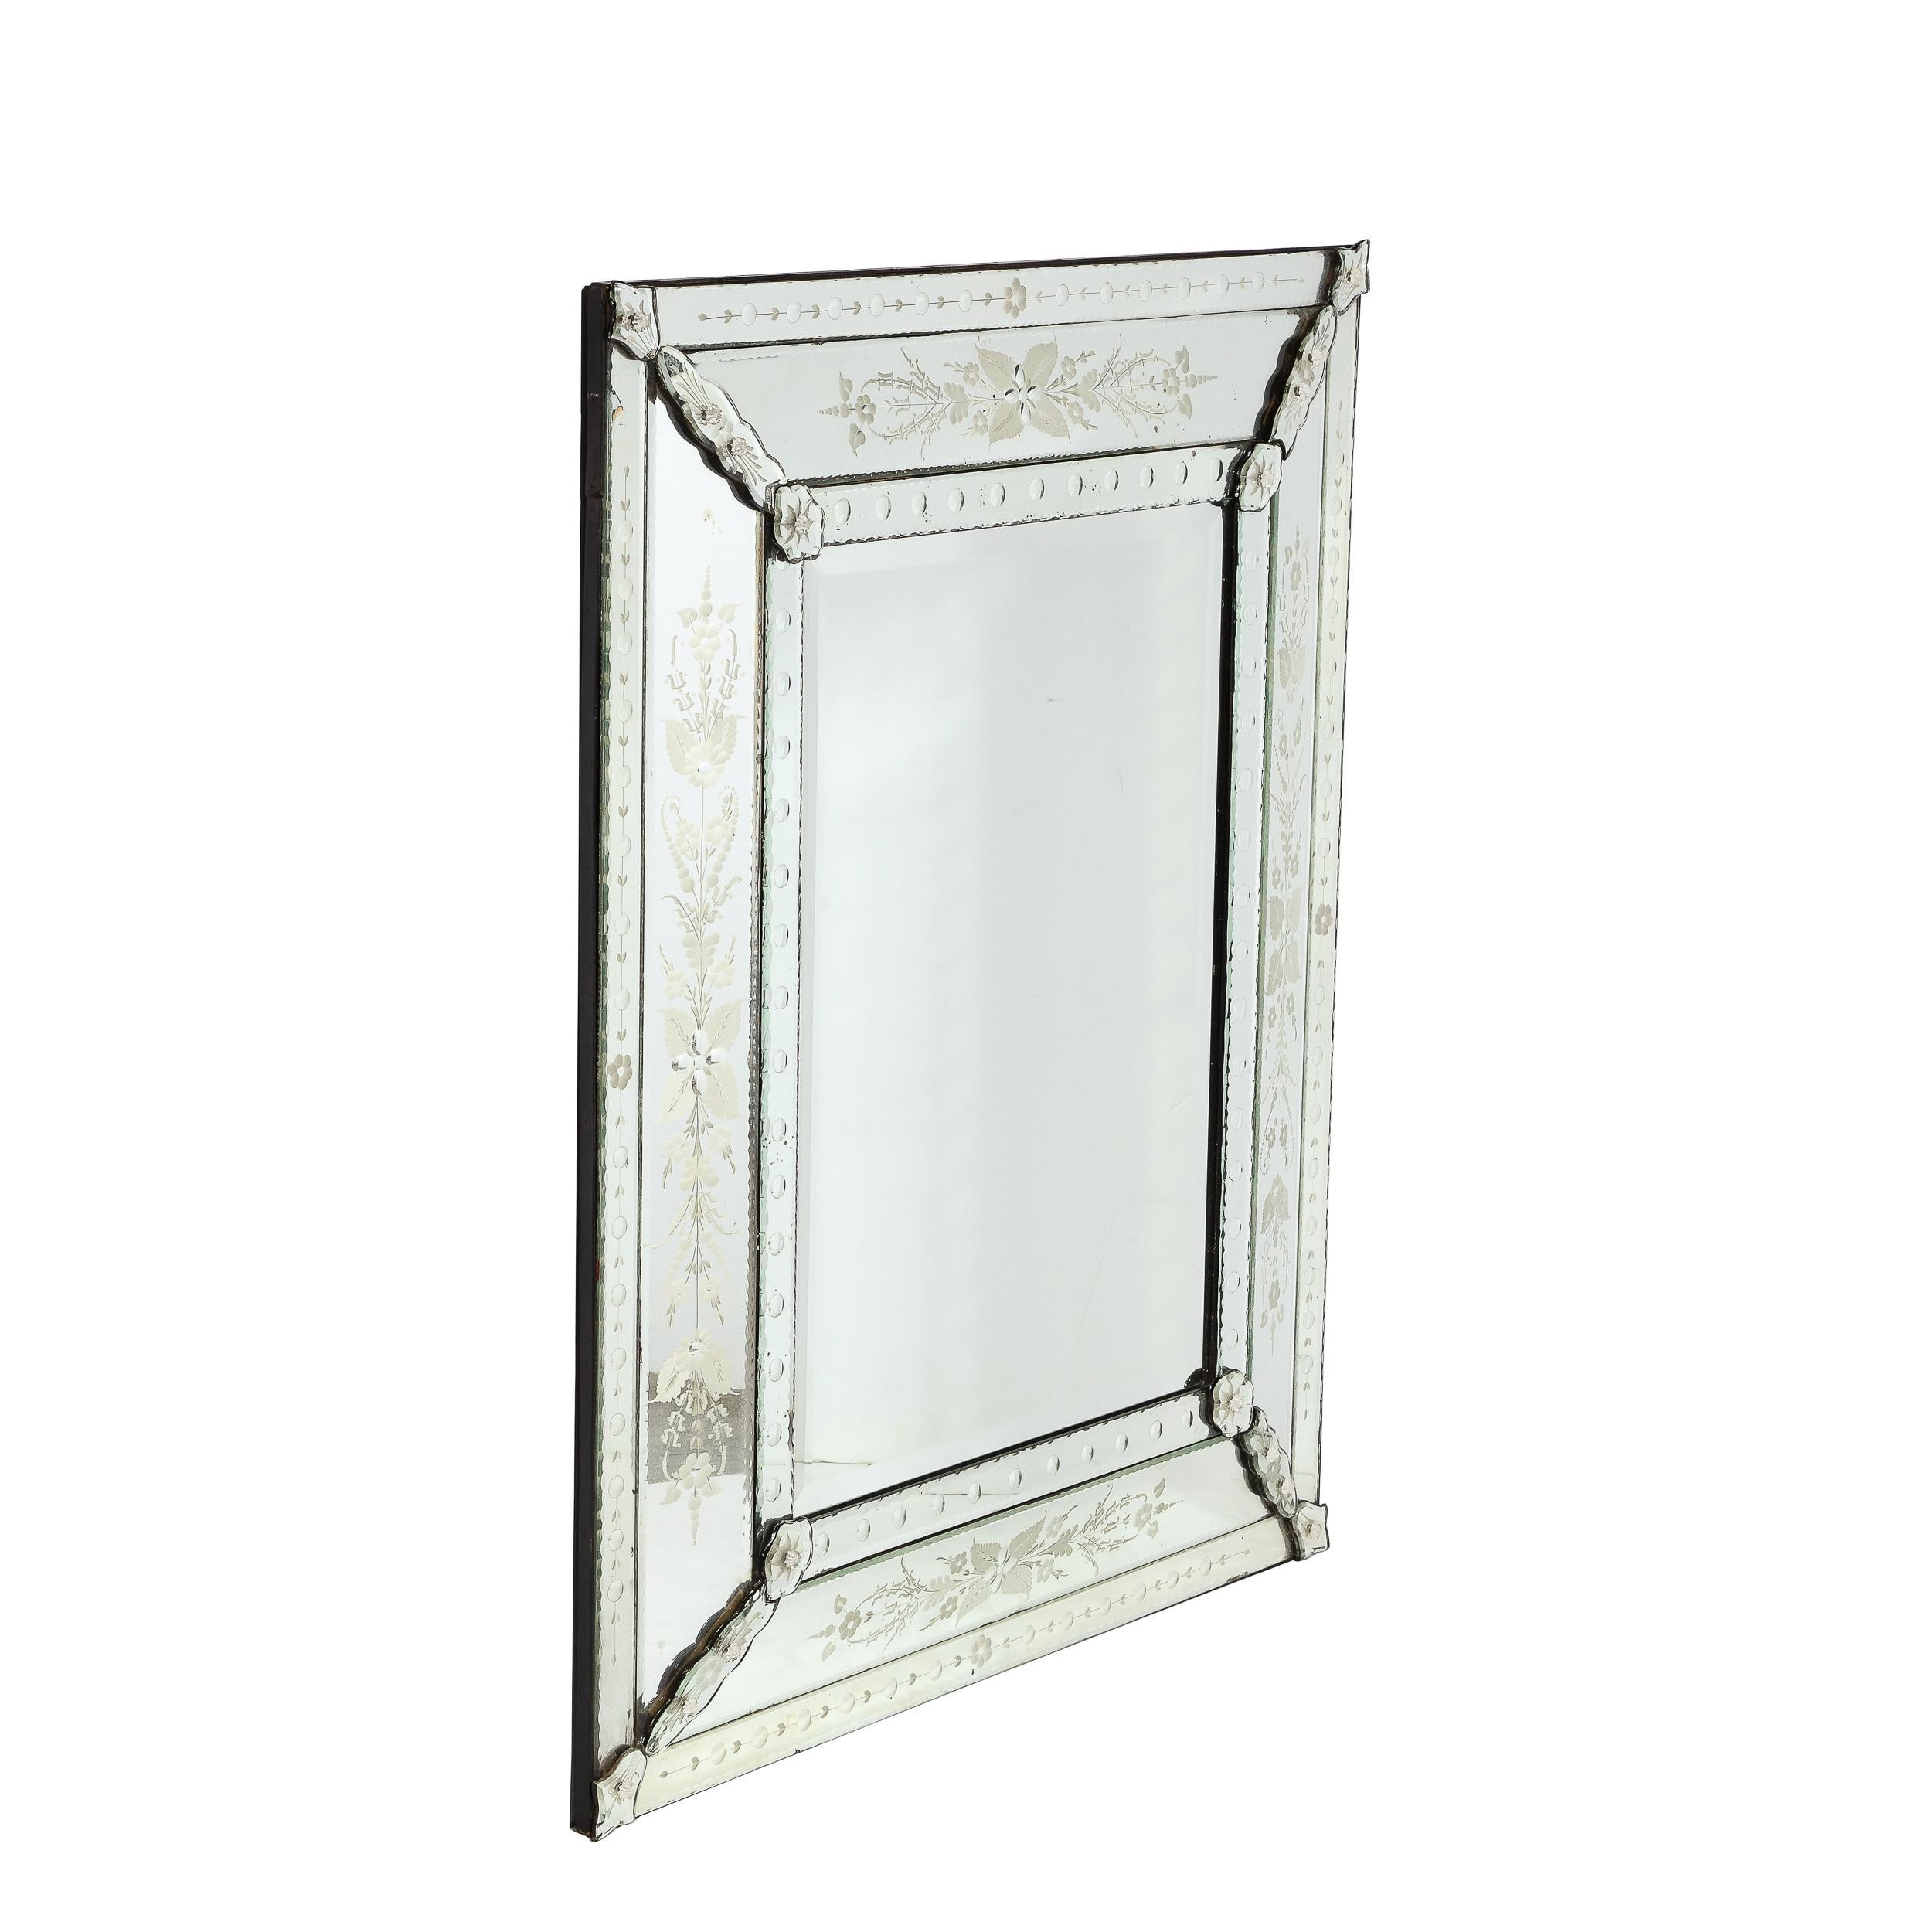 This sleek and gleaming Mid-Century Modernist Venetian Mirror Reversed Etched W/Floral Appliques and Beveled Detailing originates from Italy, Circa 1960. Features a tiered geometric composition with illustrious detailing and precise embellishments.